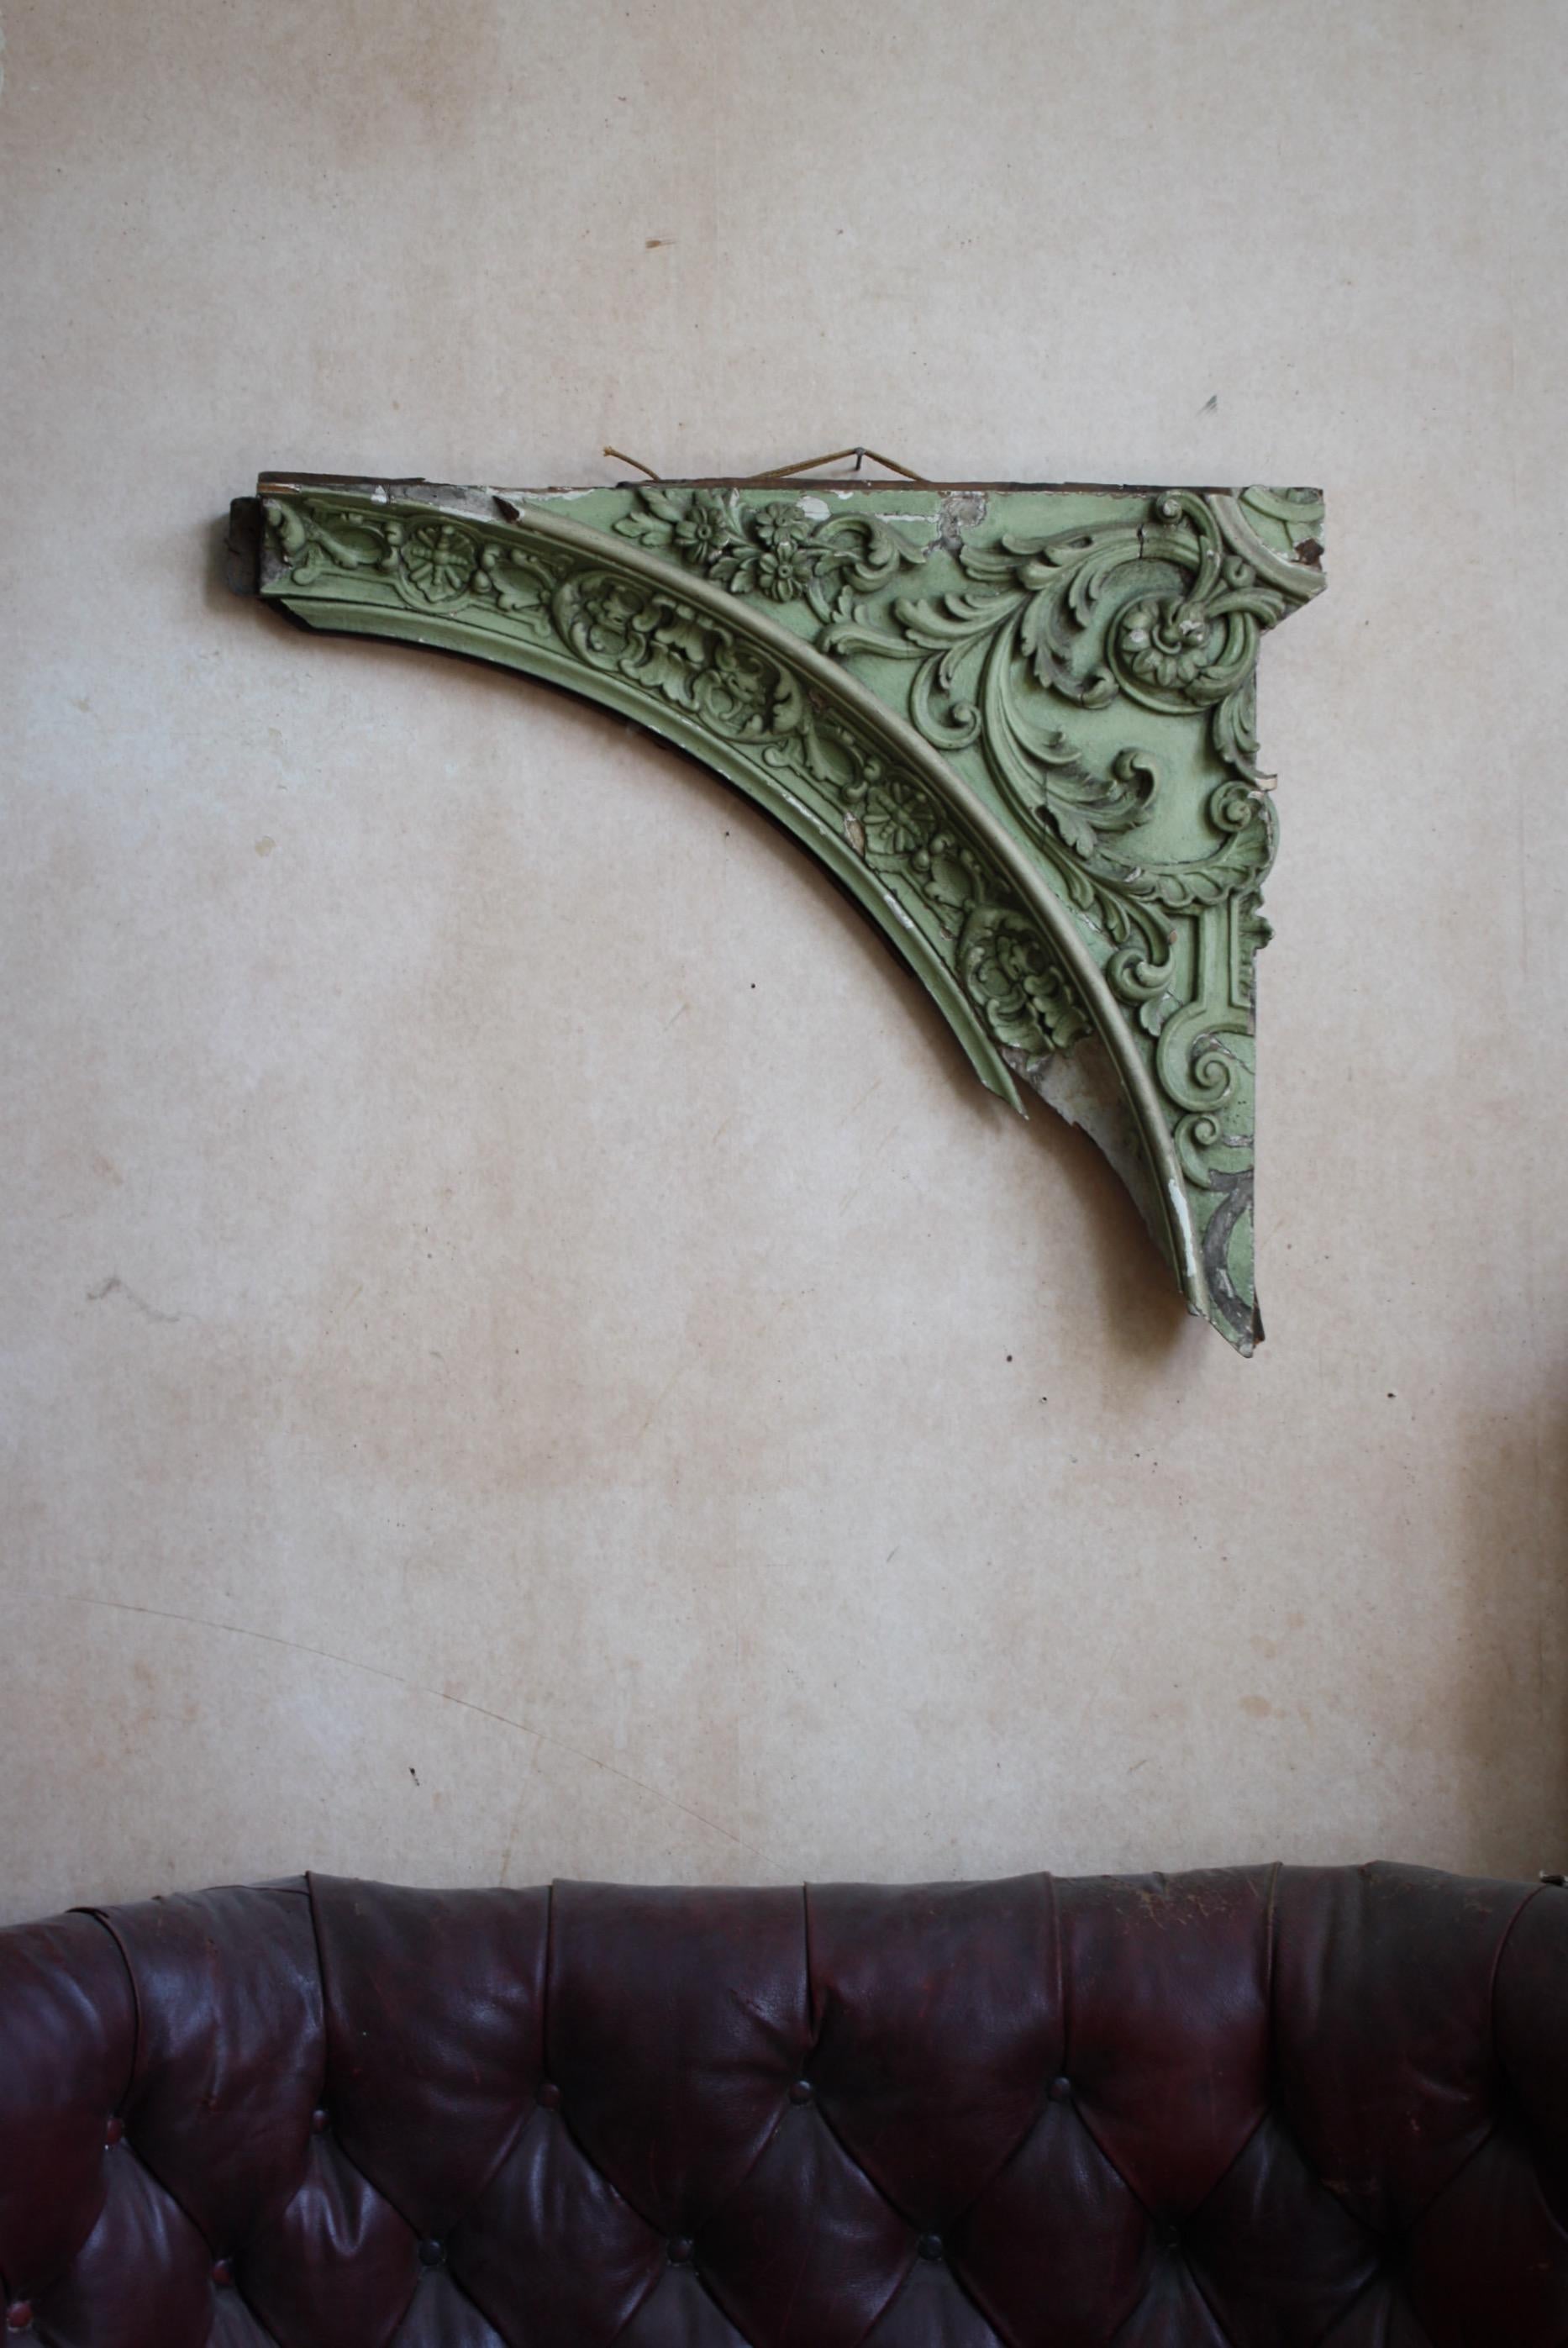 A decorative architectural wood and gesso element in its original mist green paint.

Areas of loss to the gesso work, abrasions and knocks. All adding to the decorative look of the piece. 

late 19th century in age, English in